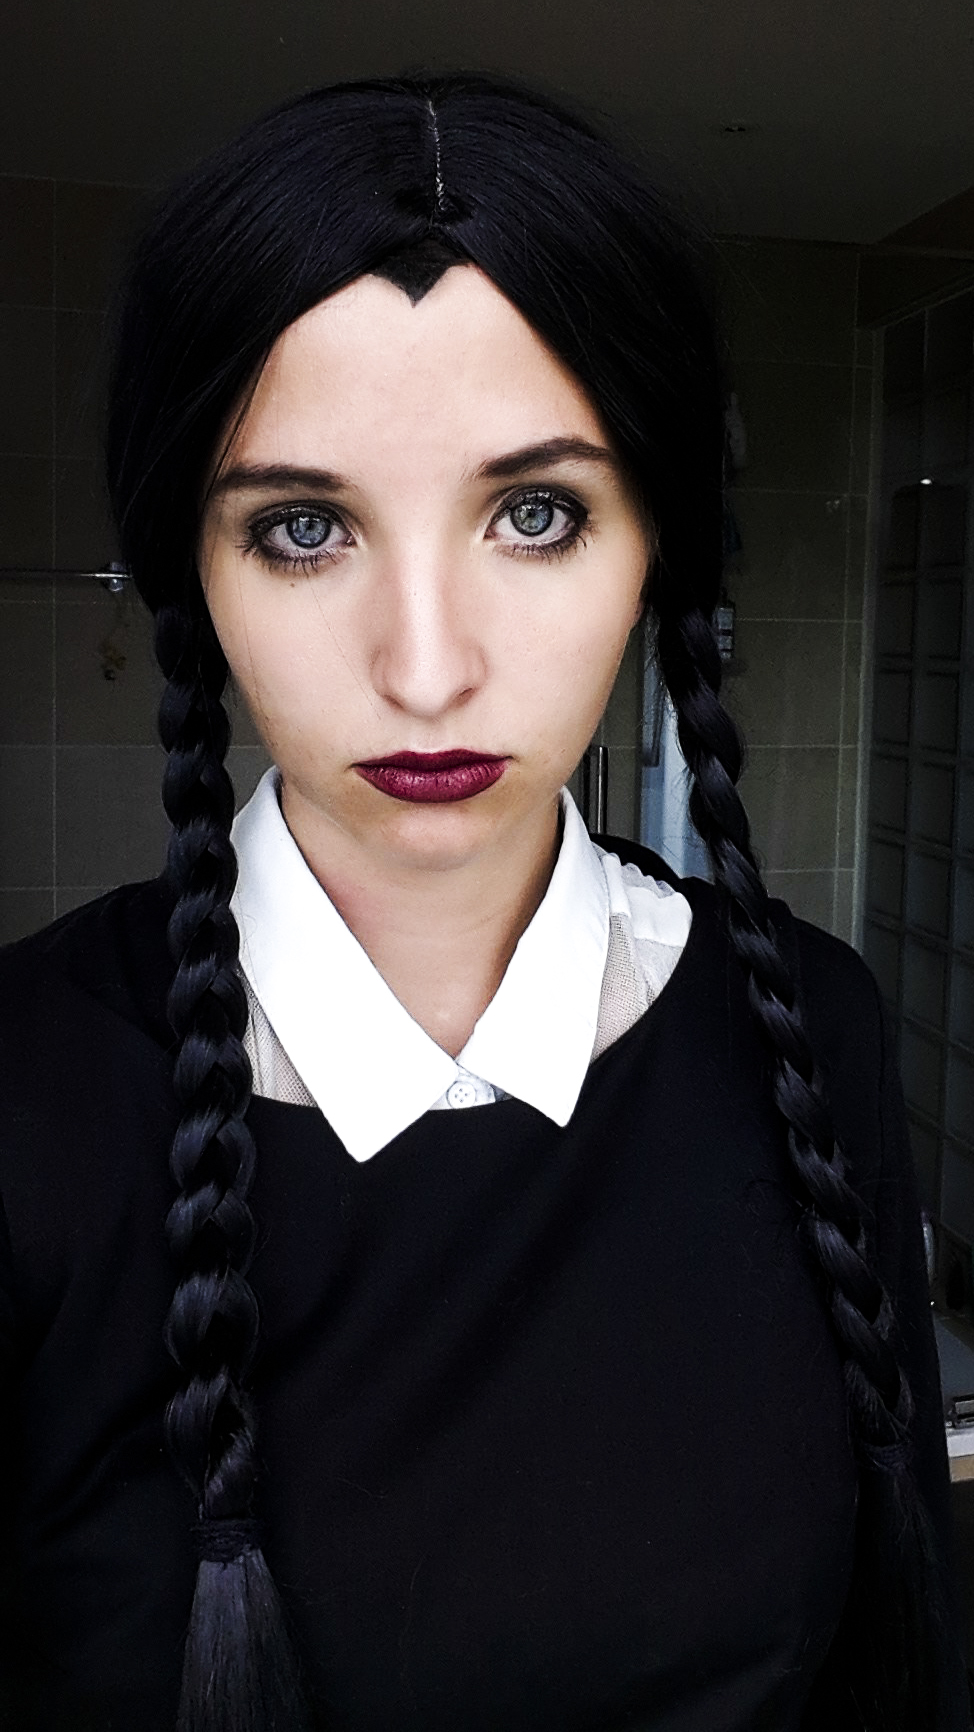 Wednesday Addams make up try out by Ninaaamazing on DeviantArt